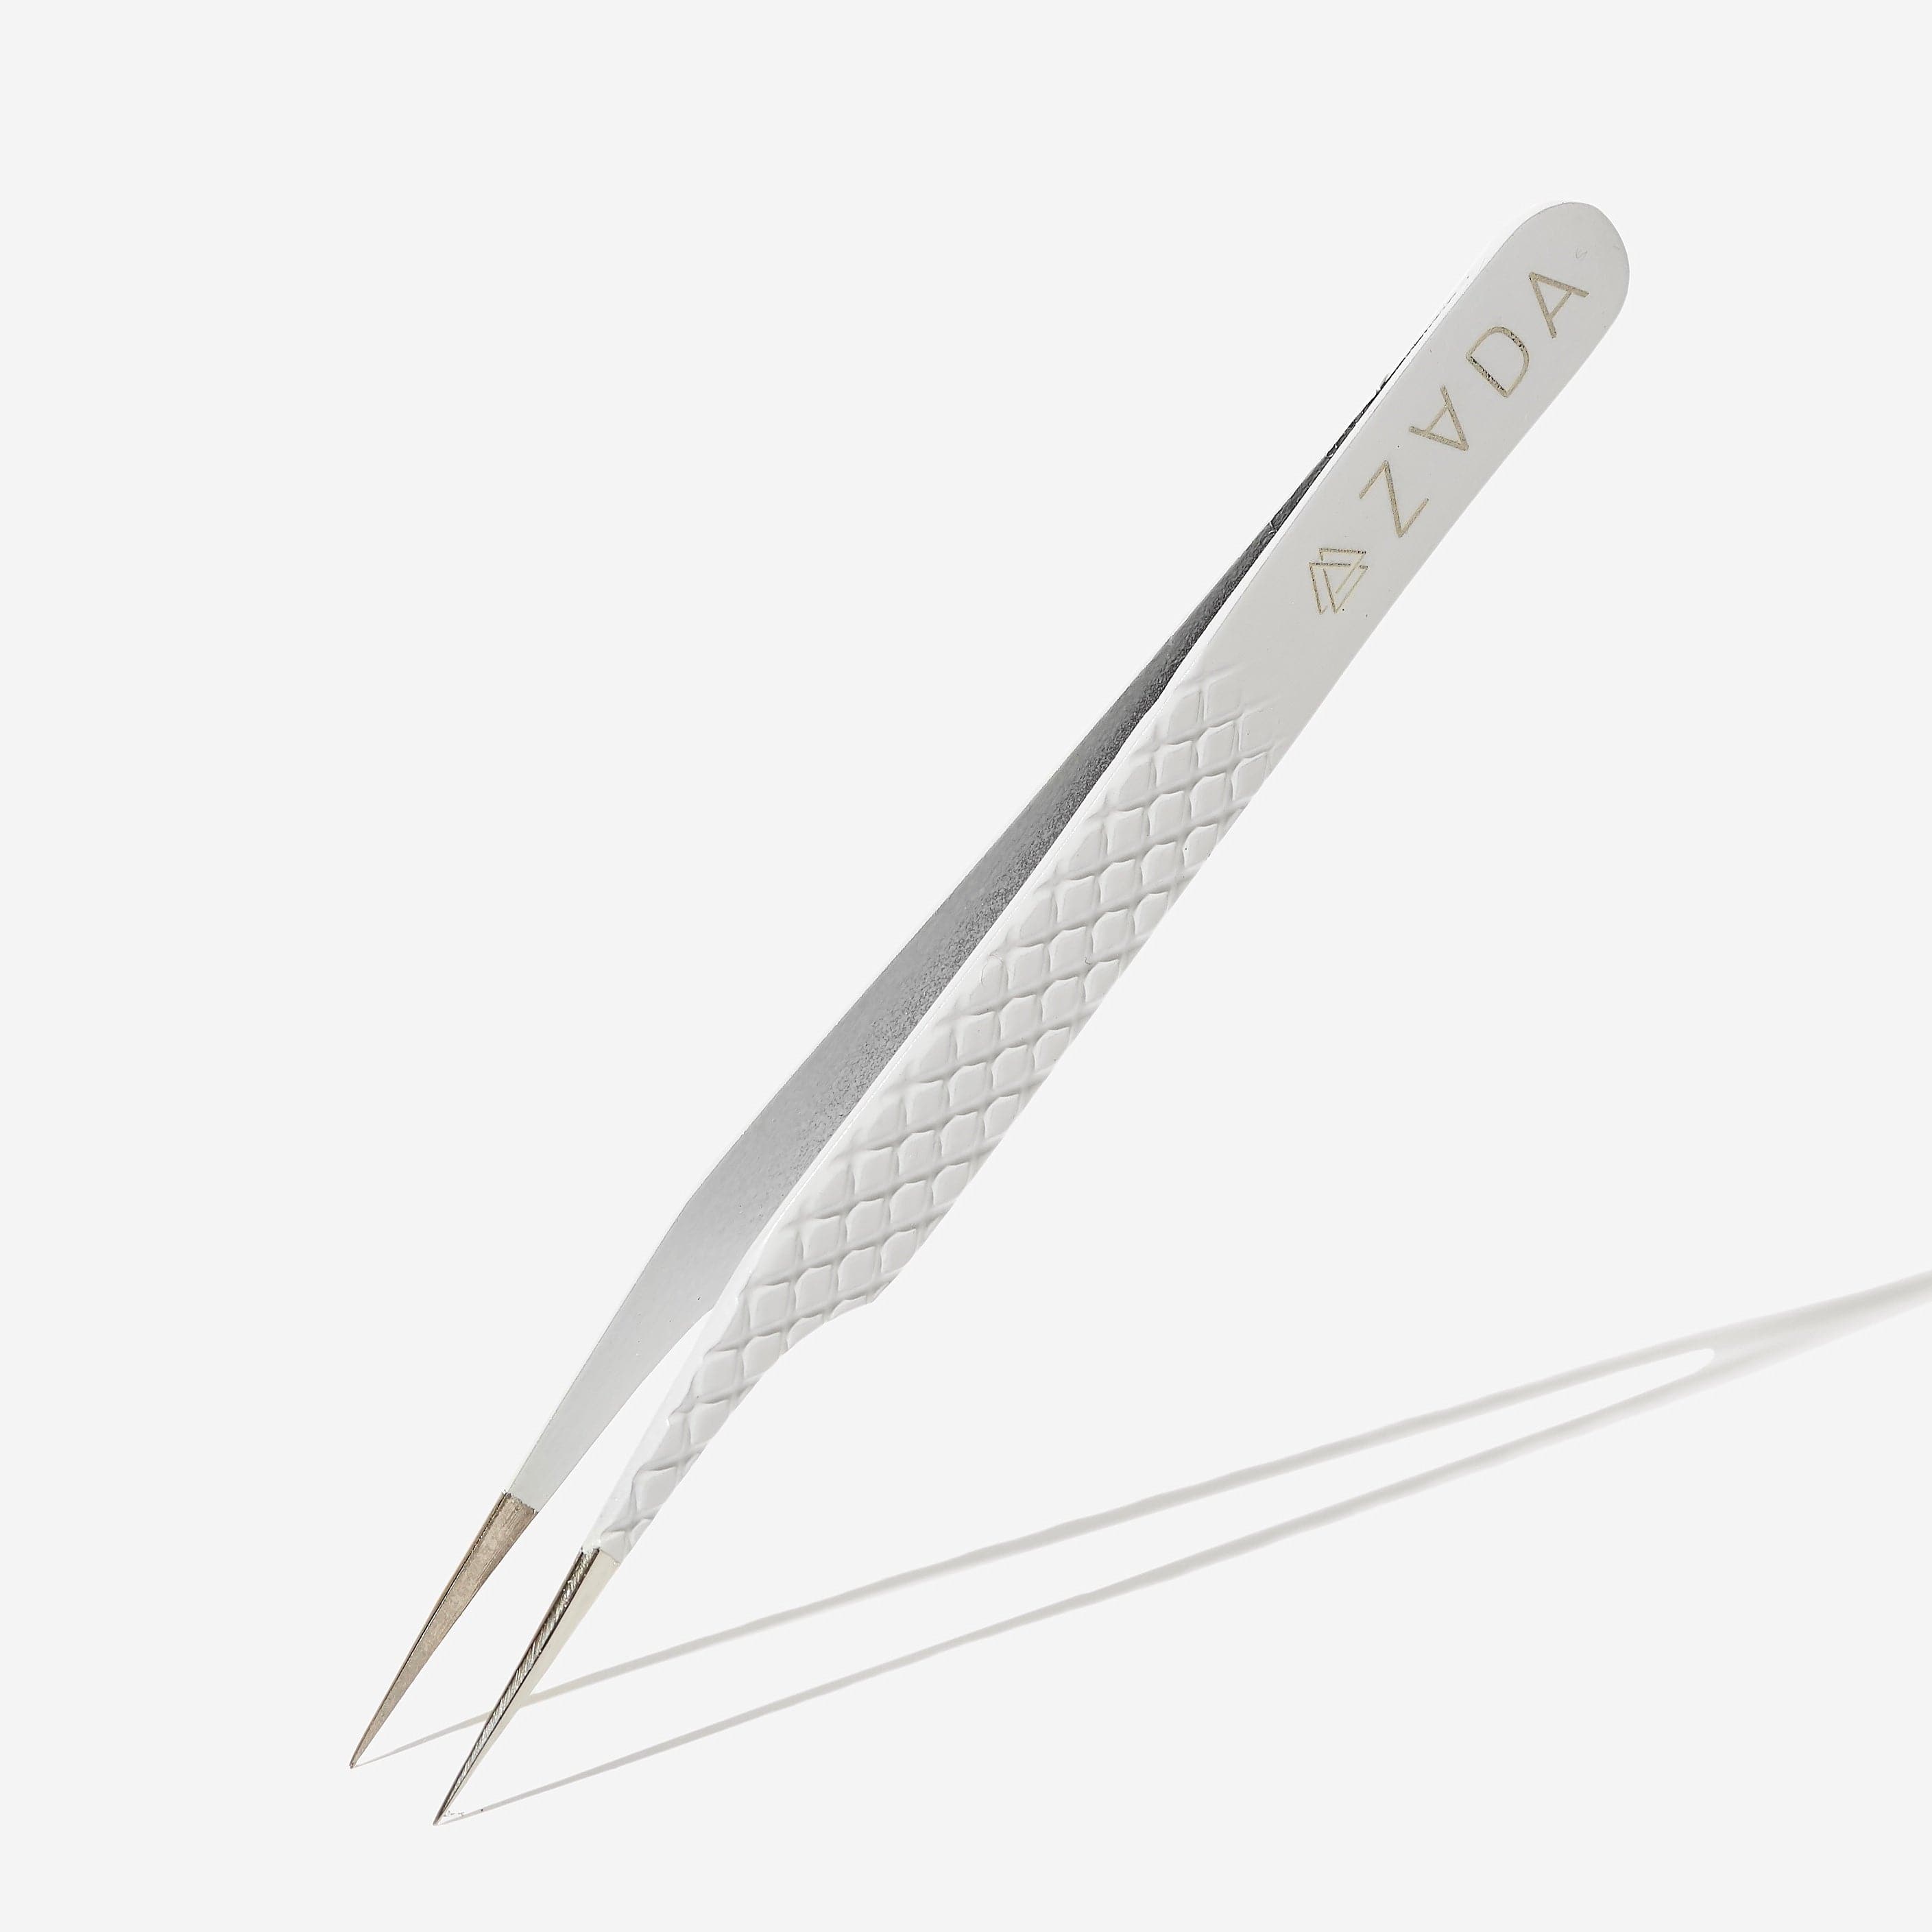 Pro-Curved Tweezers, Stainless Steel - Tweezers - JB Lashes – Pro Shop JB  LASHES